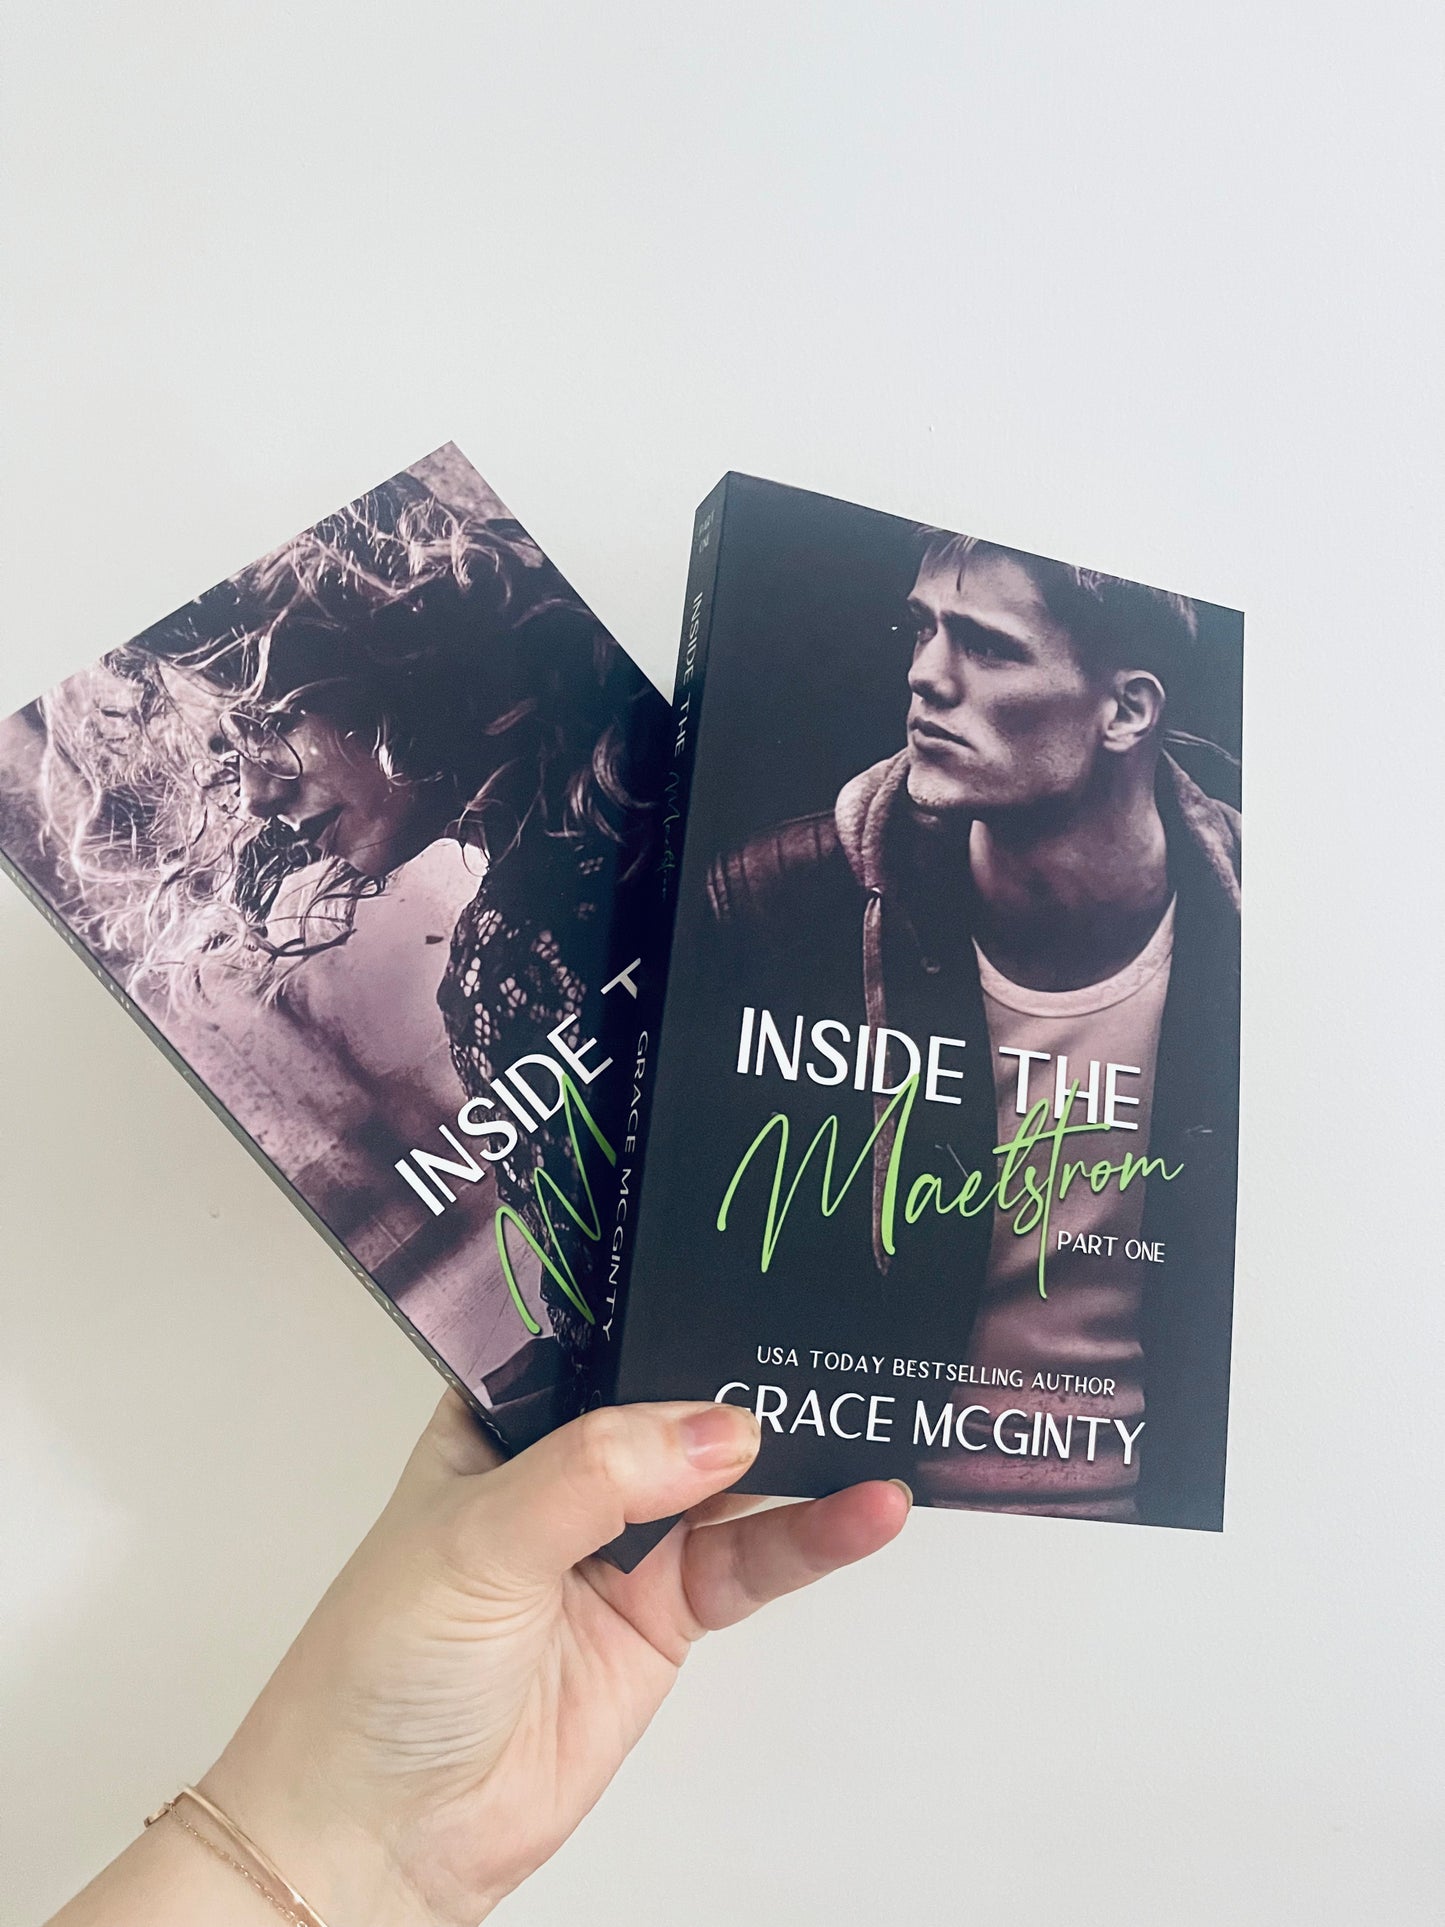 Inside the Maelstrom by Grace McGinty